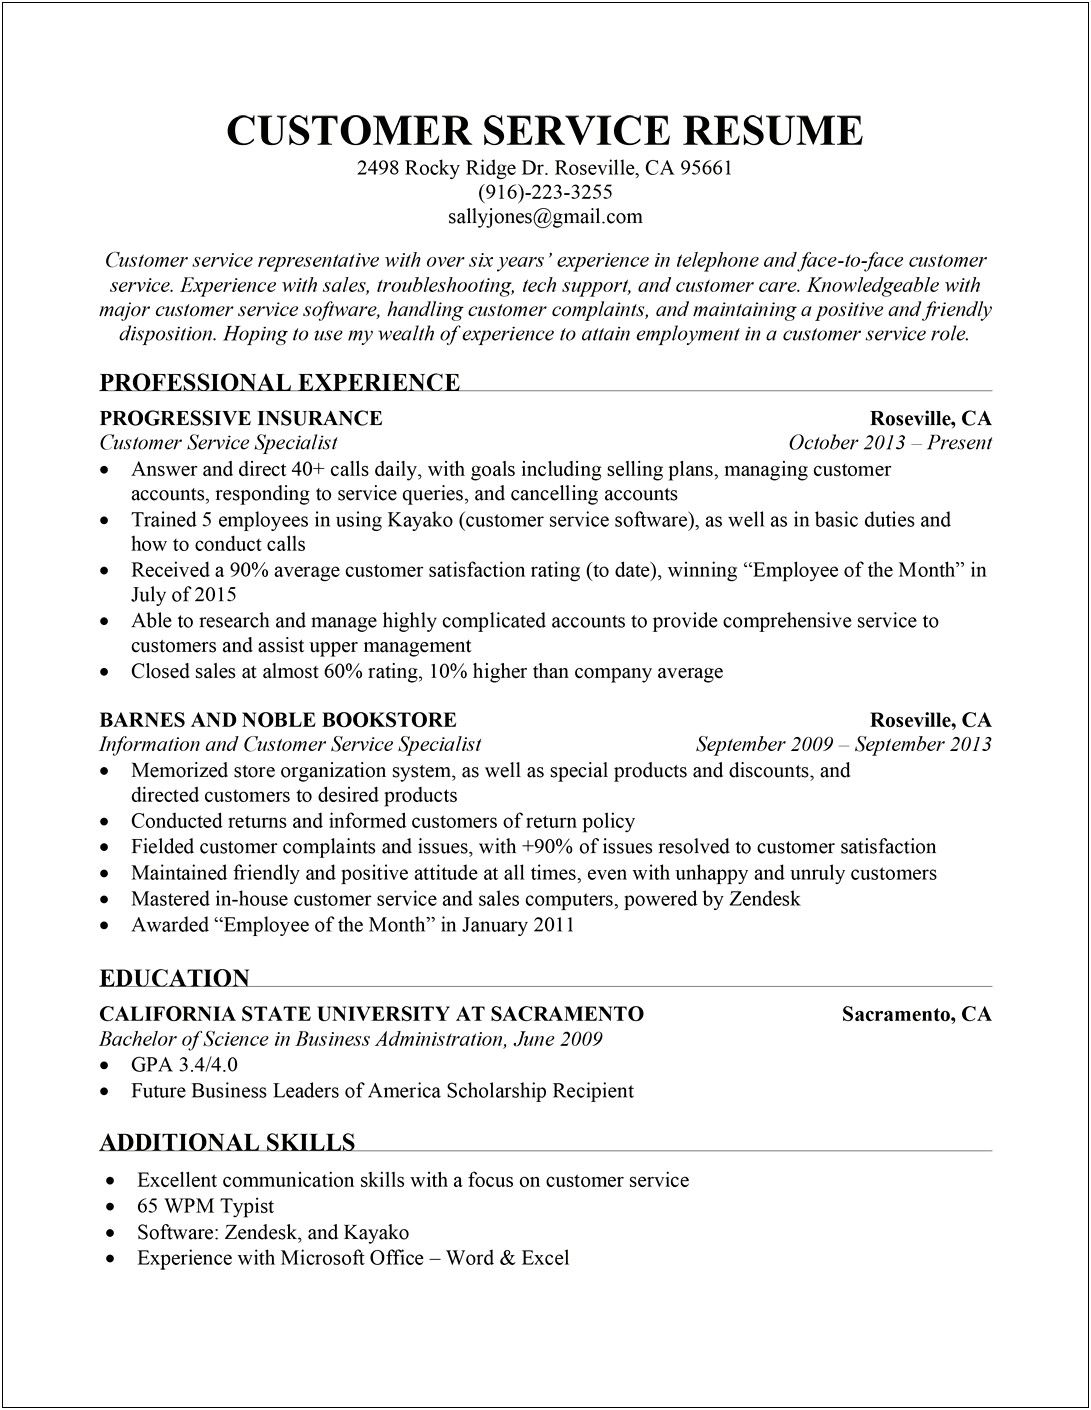 Resume Objective For Entry Level Call Center